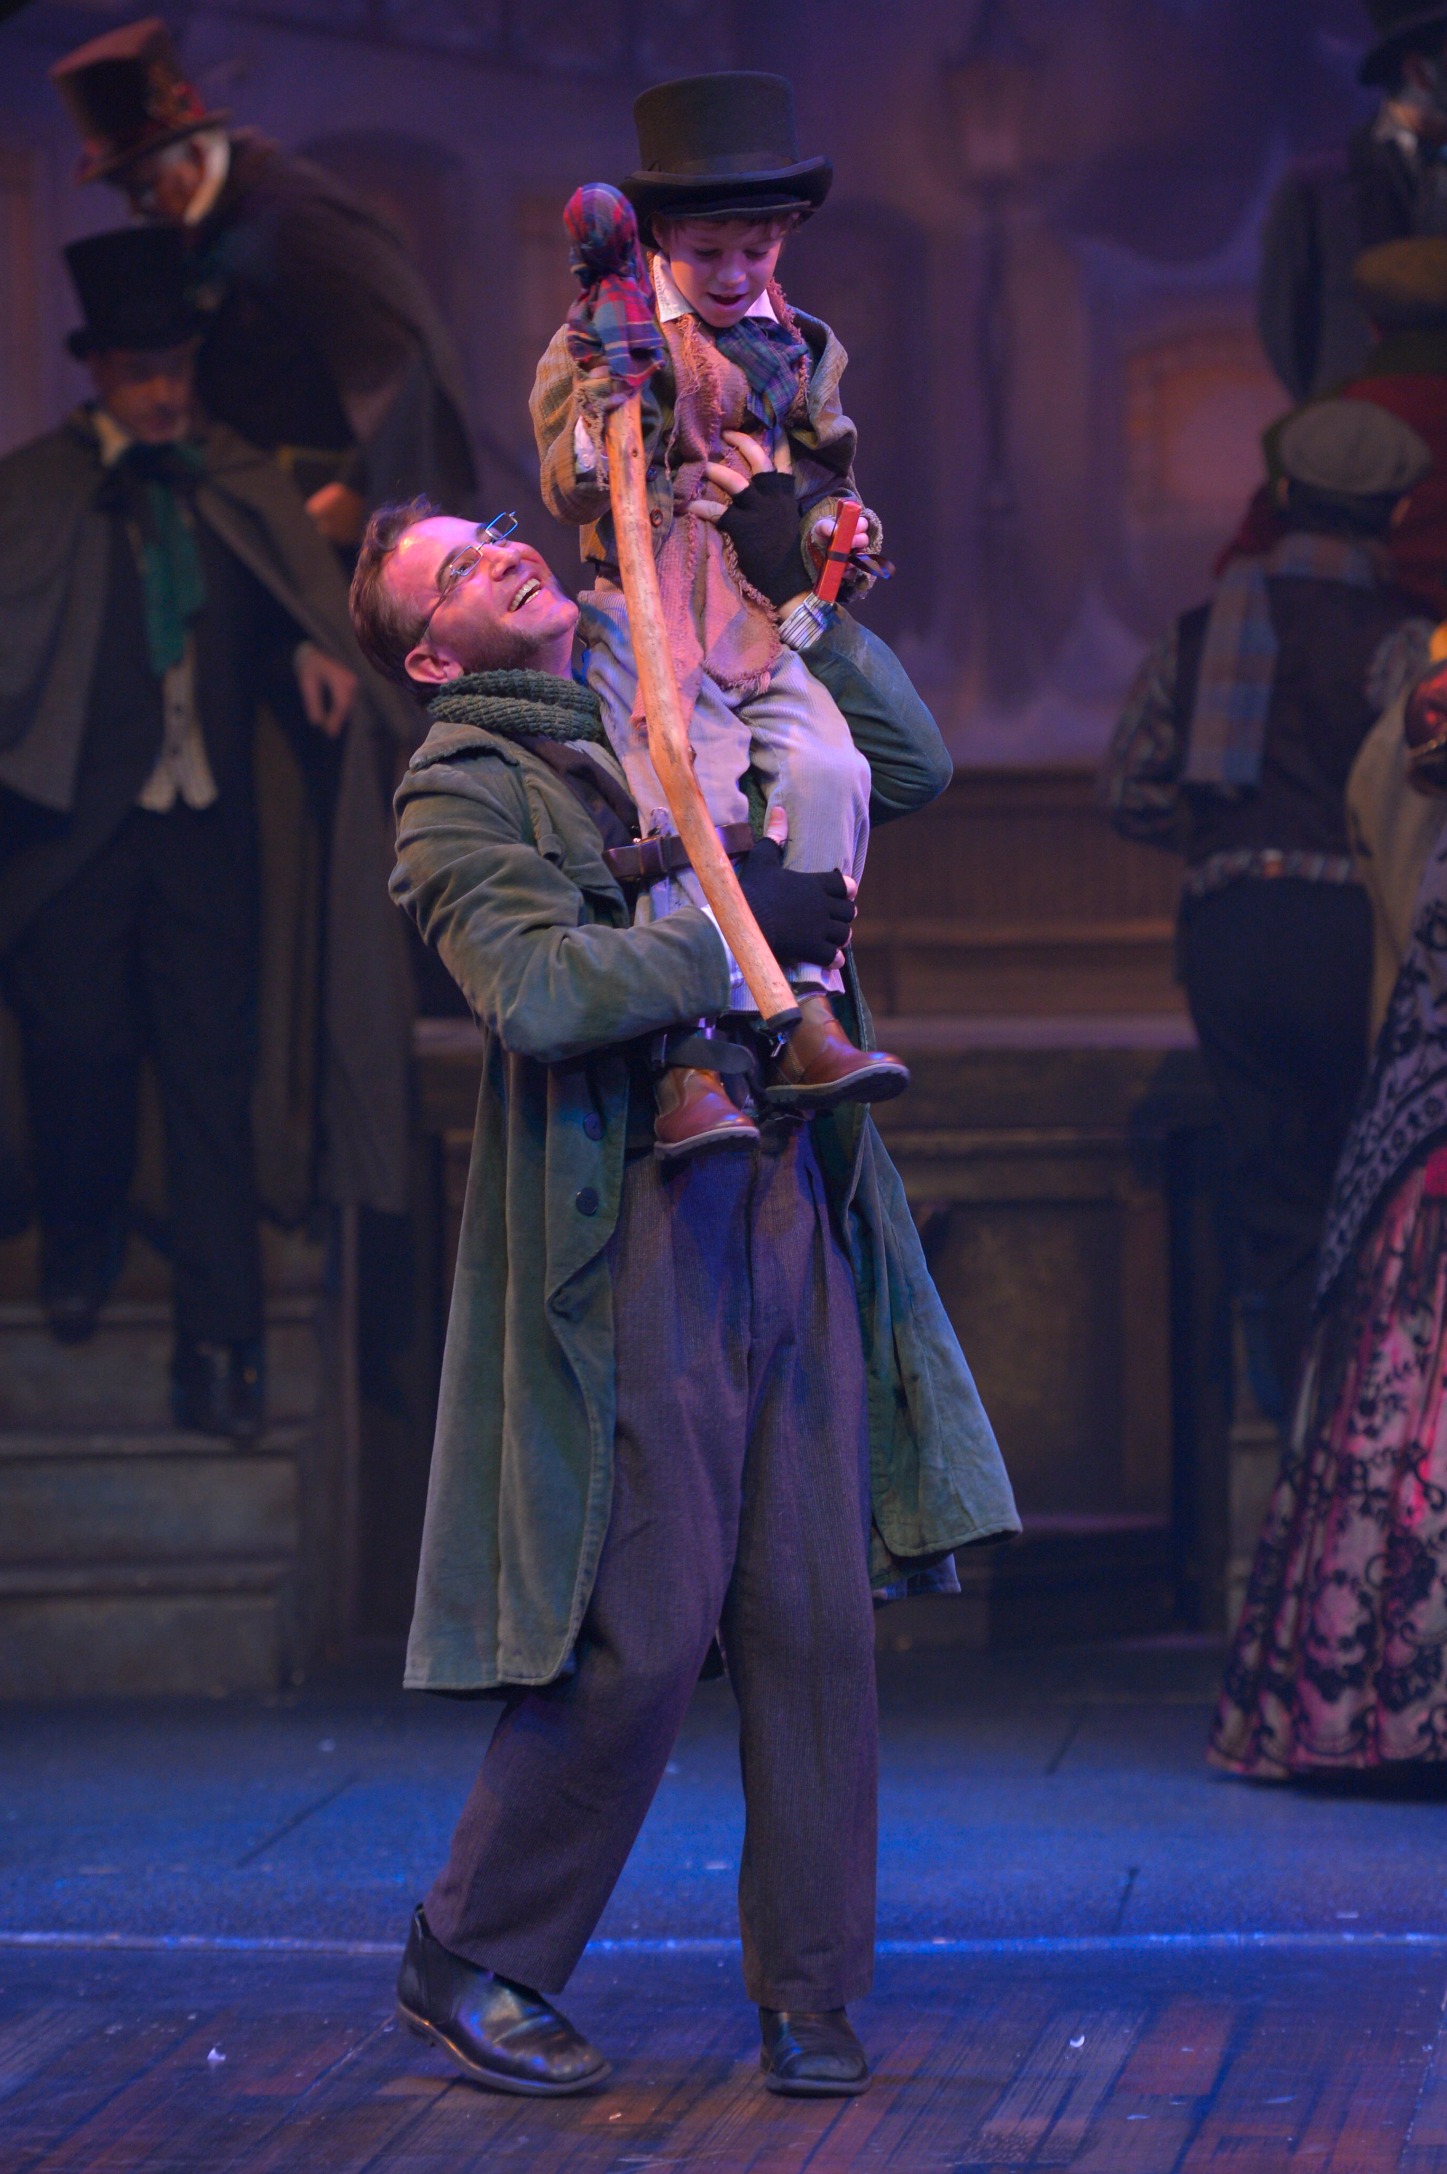 A Christmas Carol Walnut Creek, CA at Dean Lesher Center For the Arts